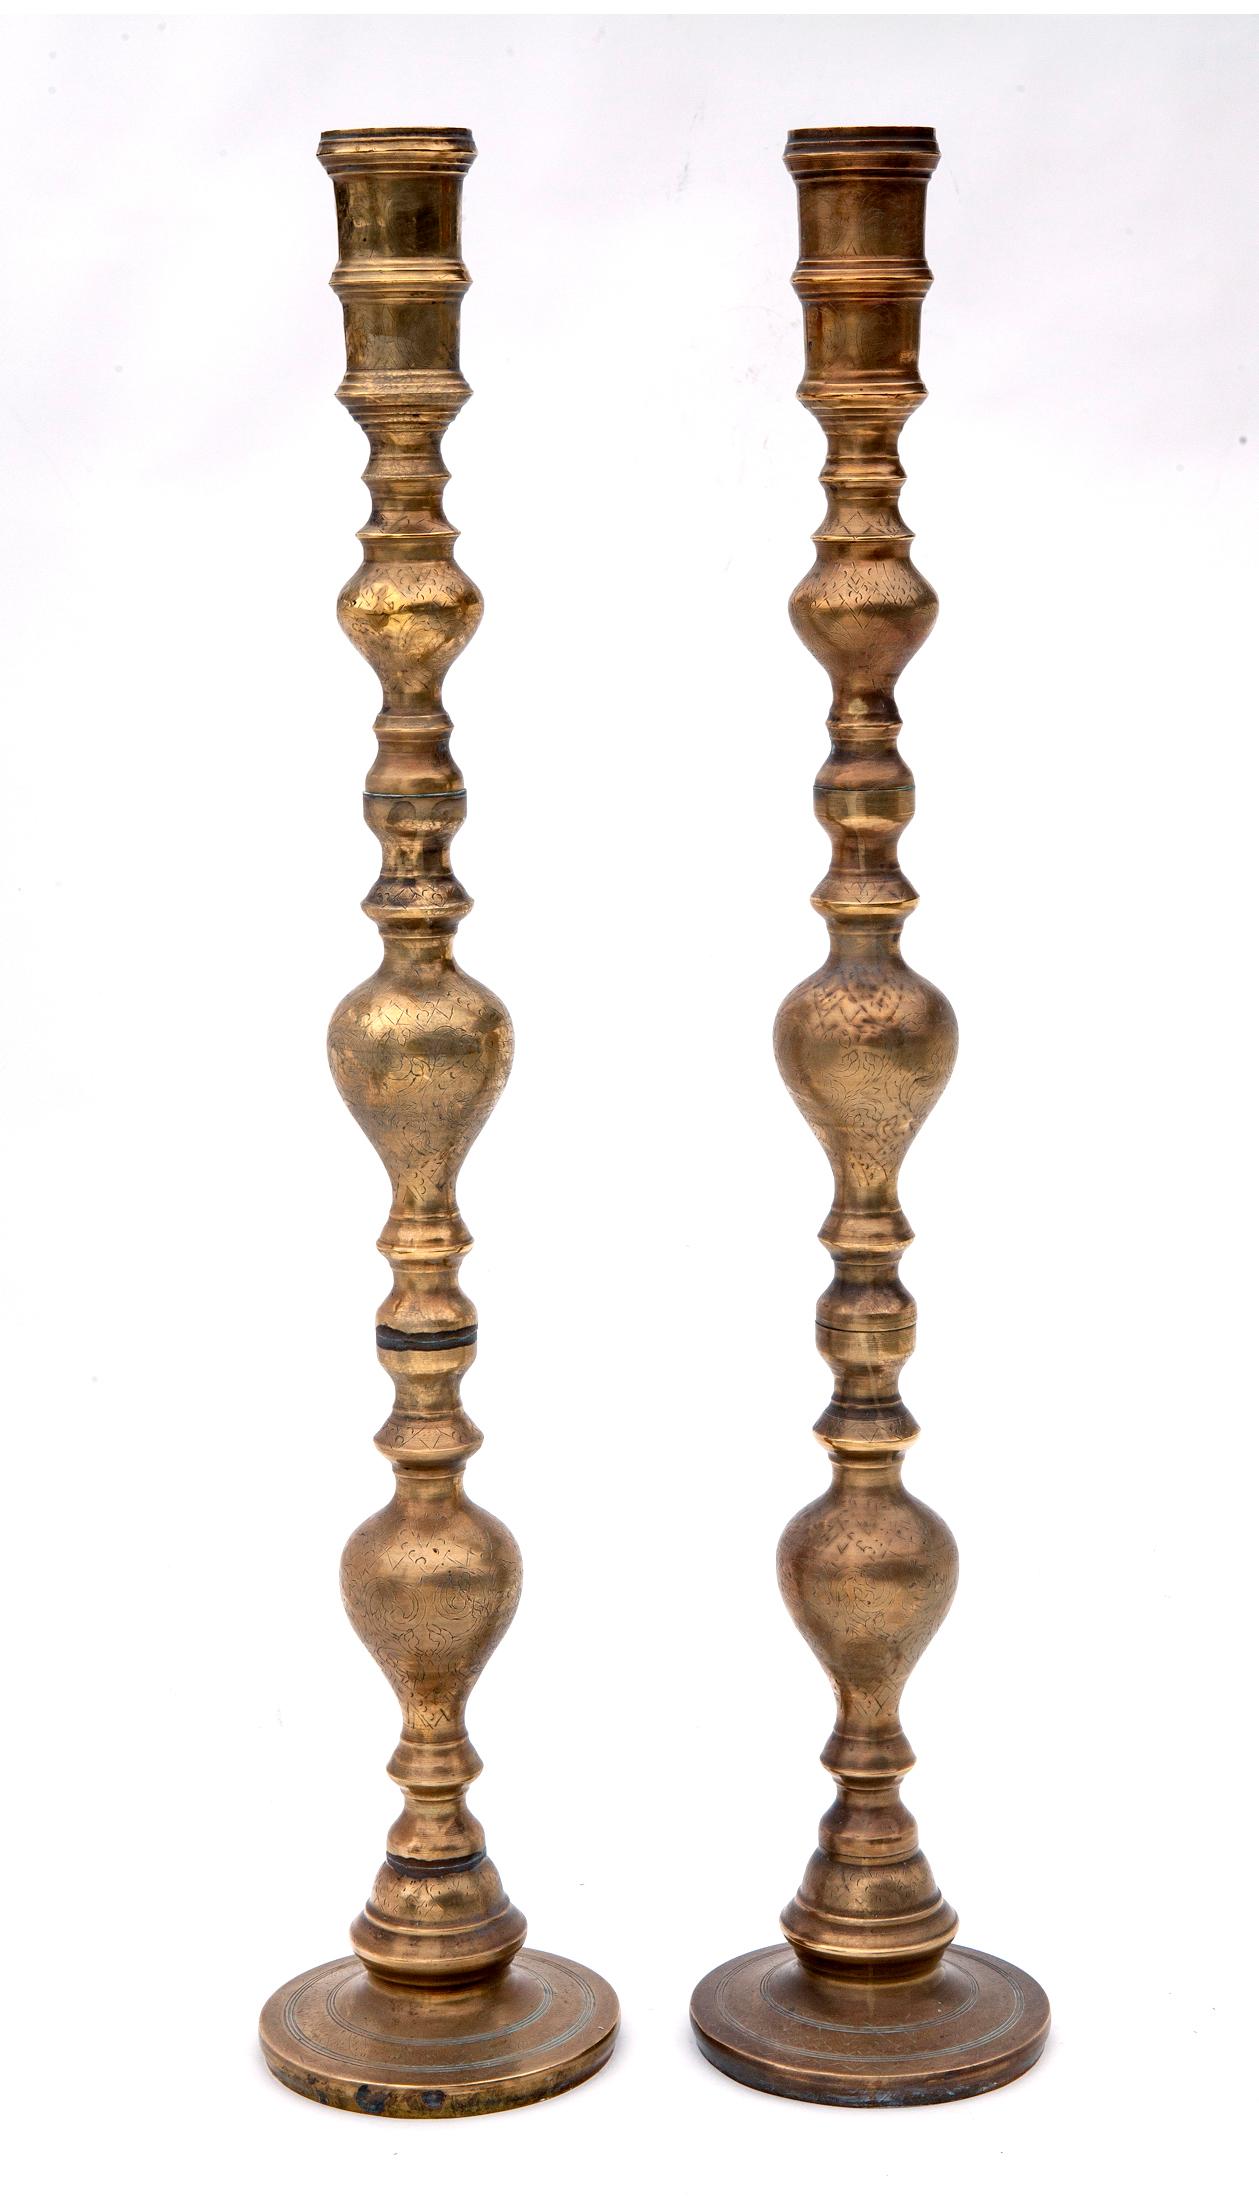 A pair of unusually tall  Early 20th century brass candlesticks with fine etching.

